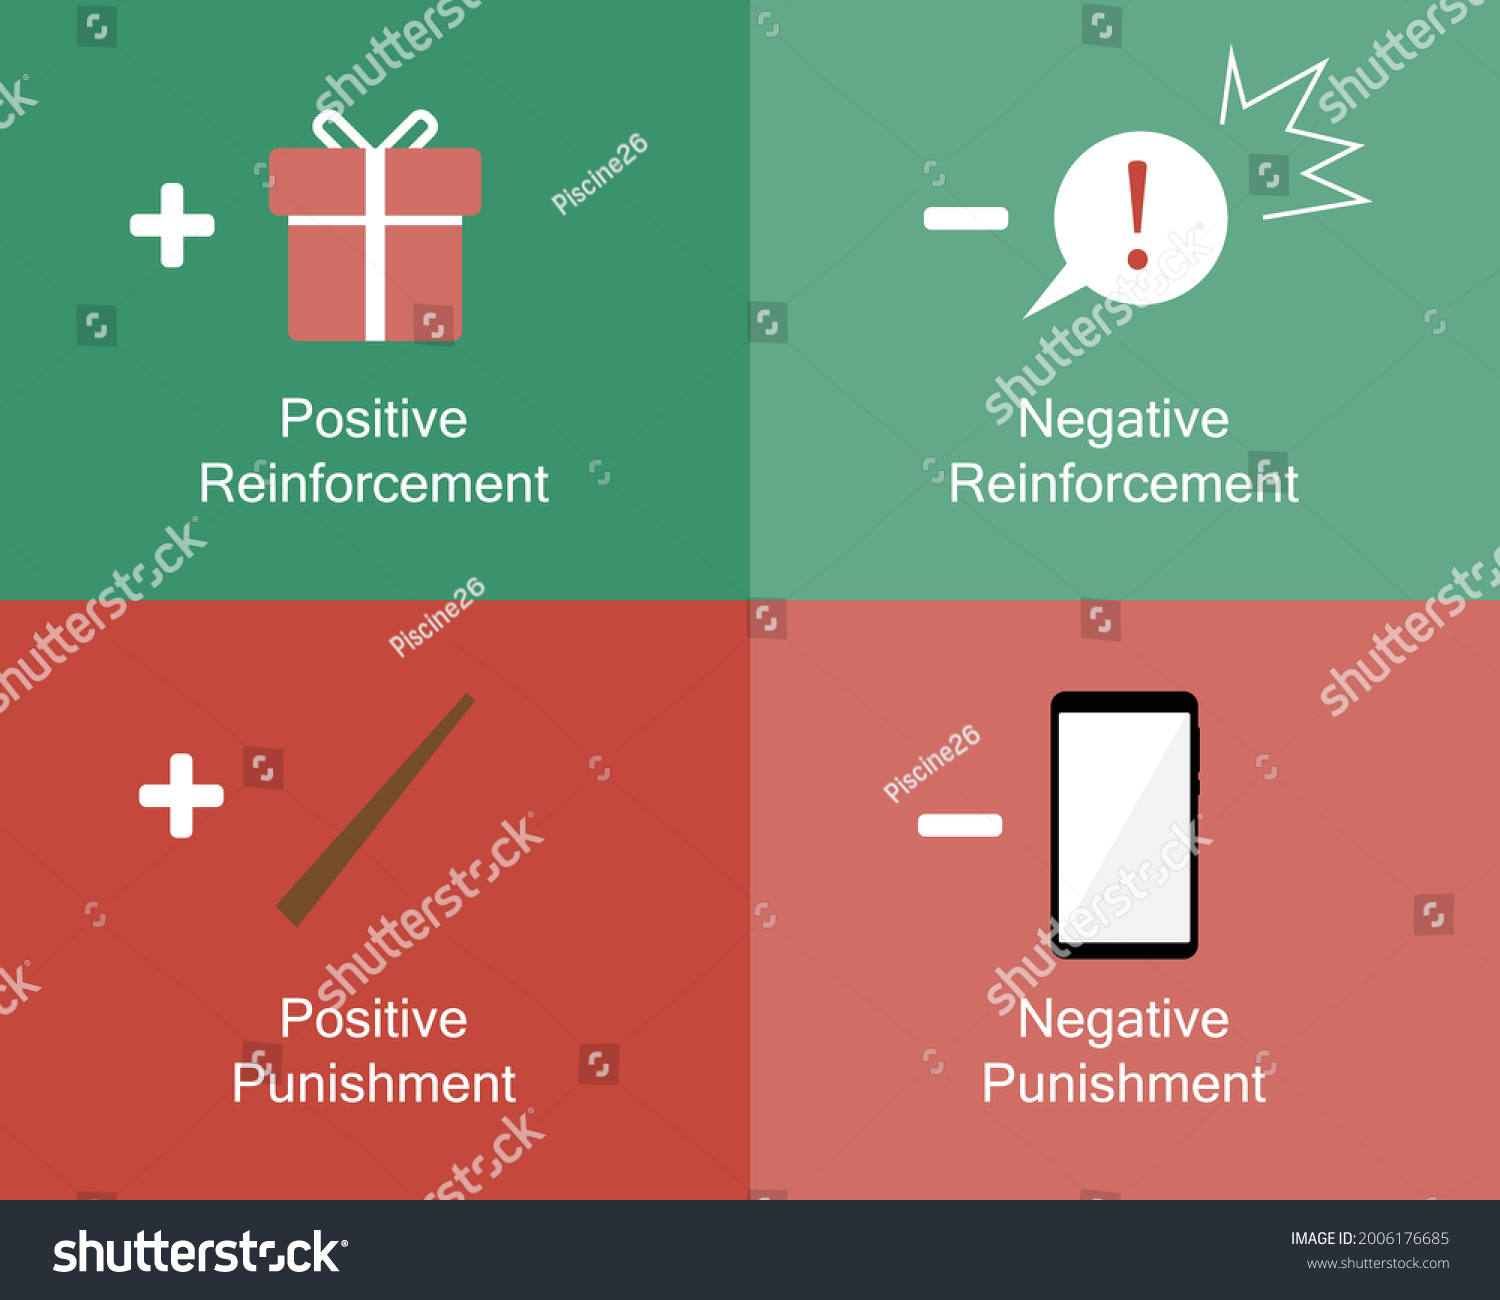 stock-vector-the-psychology-of-positive-reinforcement-theory-with-example-2006176685.jpg#s-1500,1300